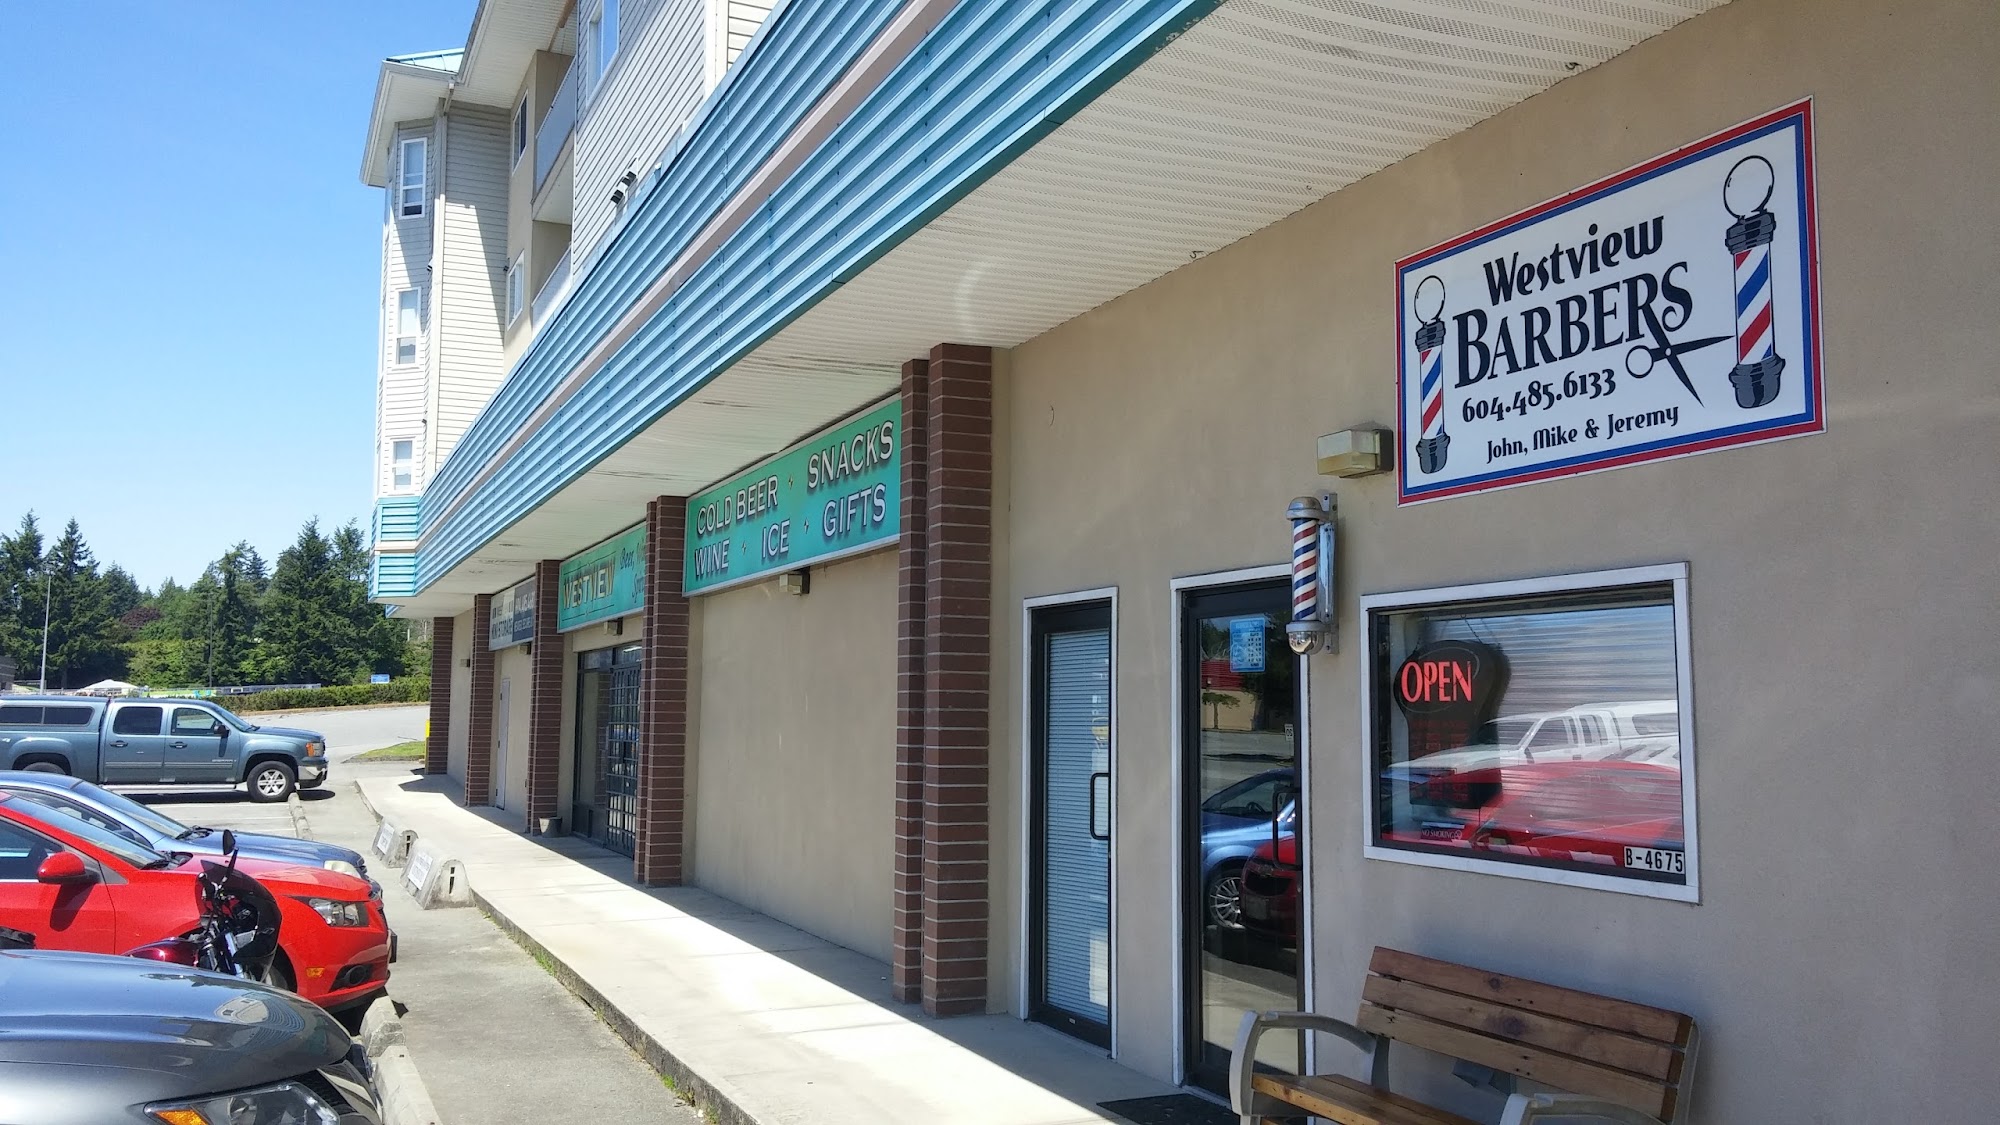 Westview Barbers 4675 Ontario Ave, Powell River British Columbia V8A 5B9